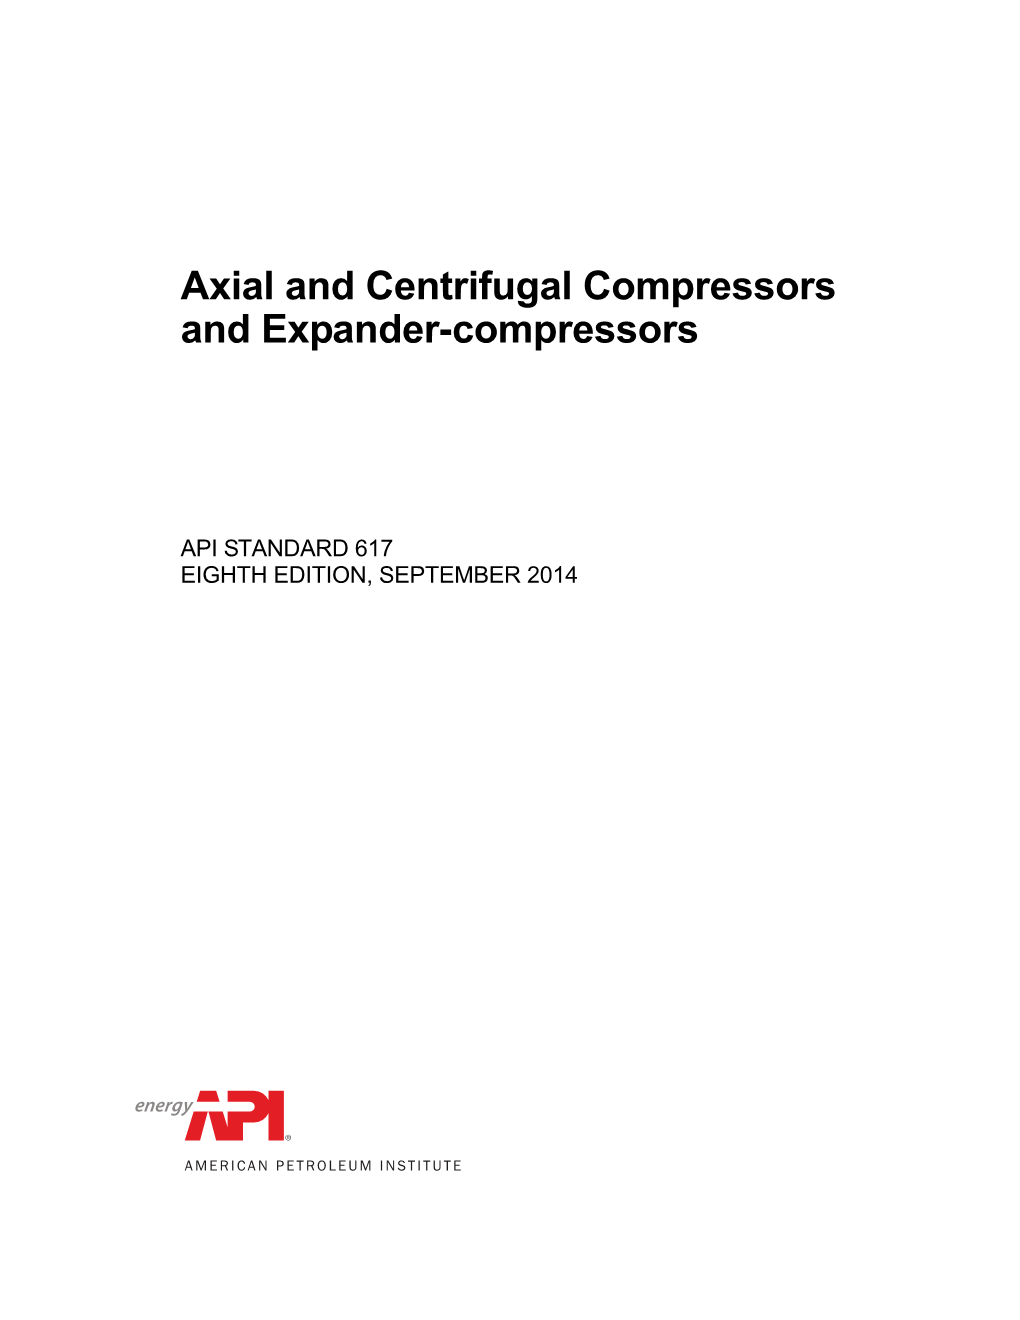 Axial and Centrifugal Compressors and Expander-Compressors